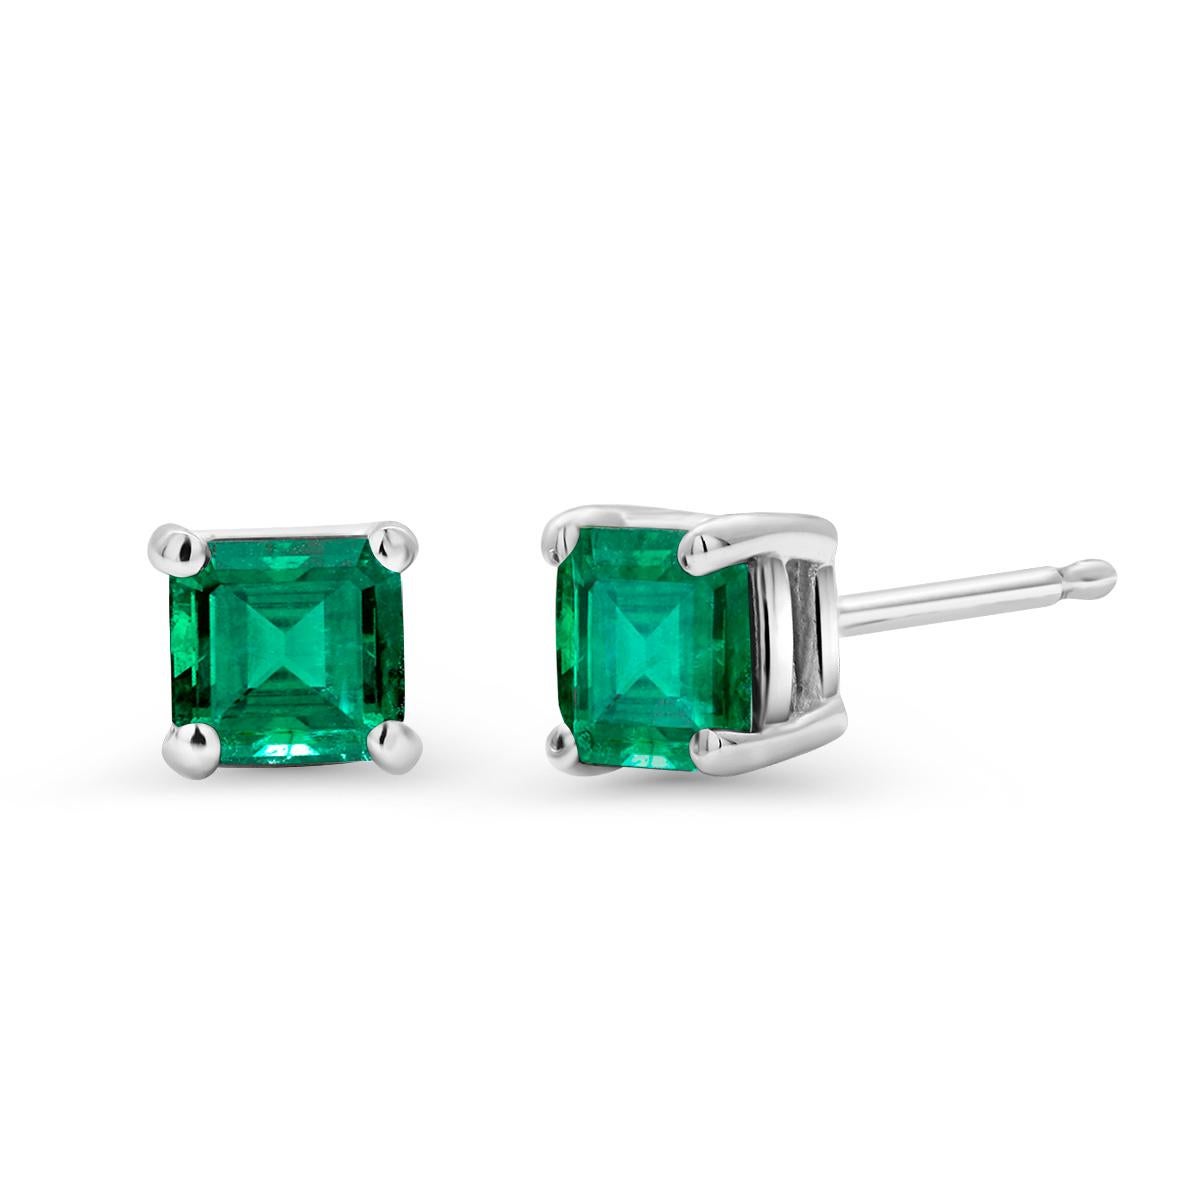 Modern Emerald Cut Colombia Emerald White Gold Stud Earrings Weighing 0.80 Carats 